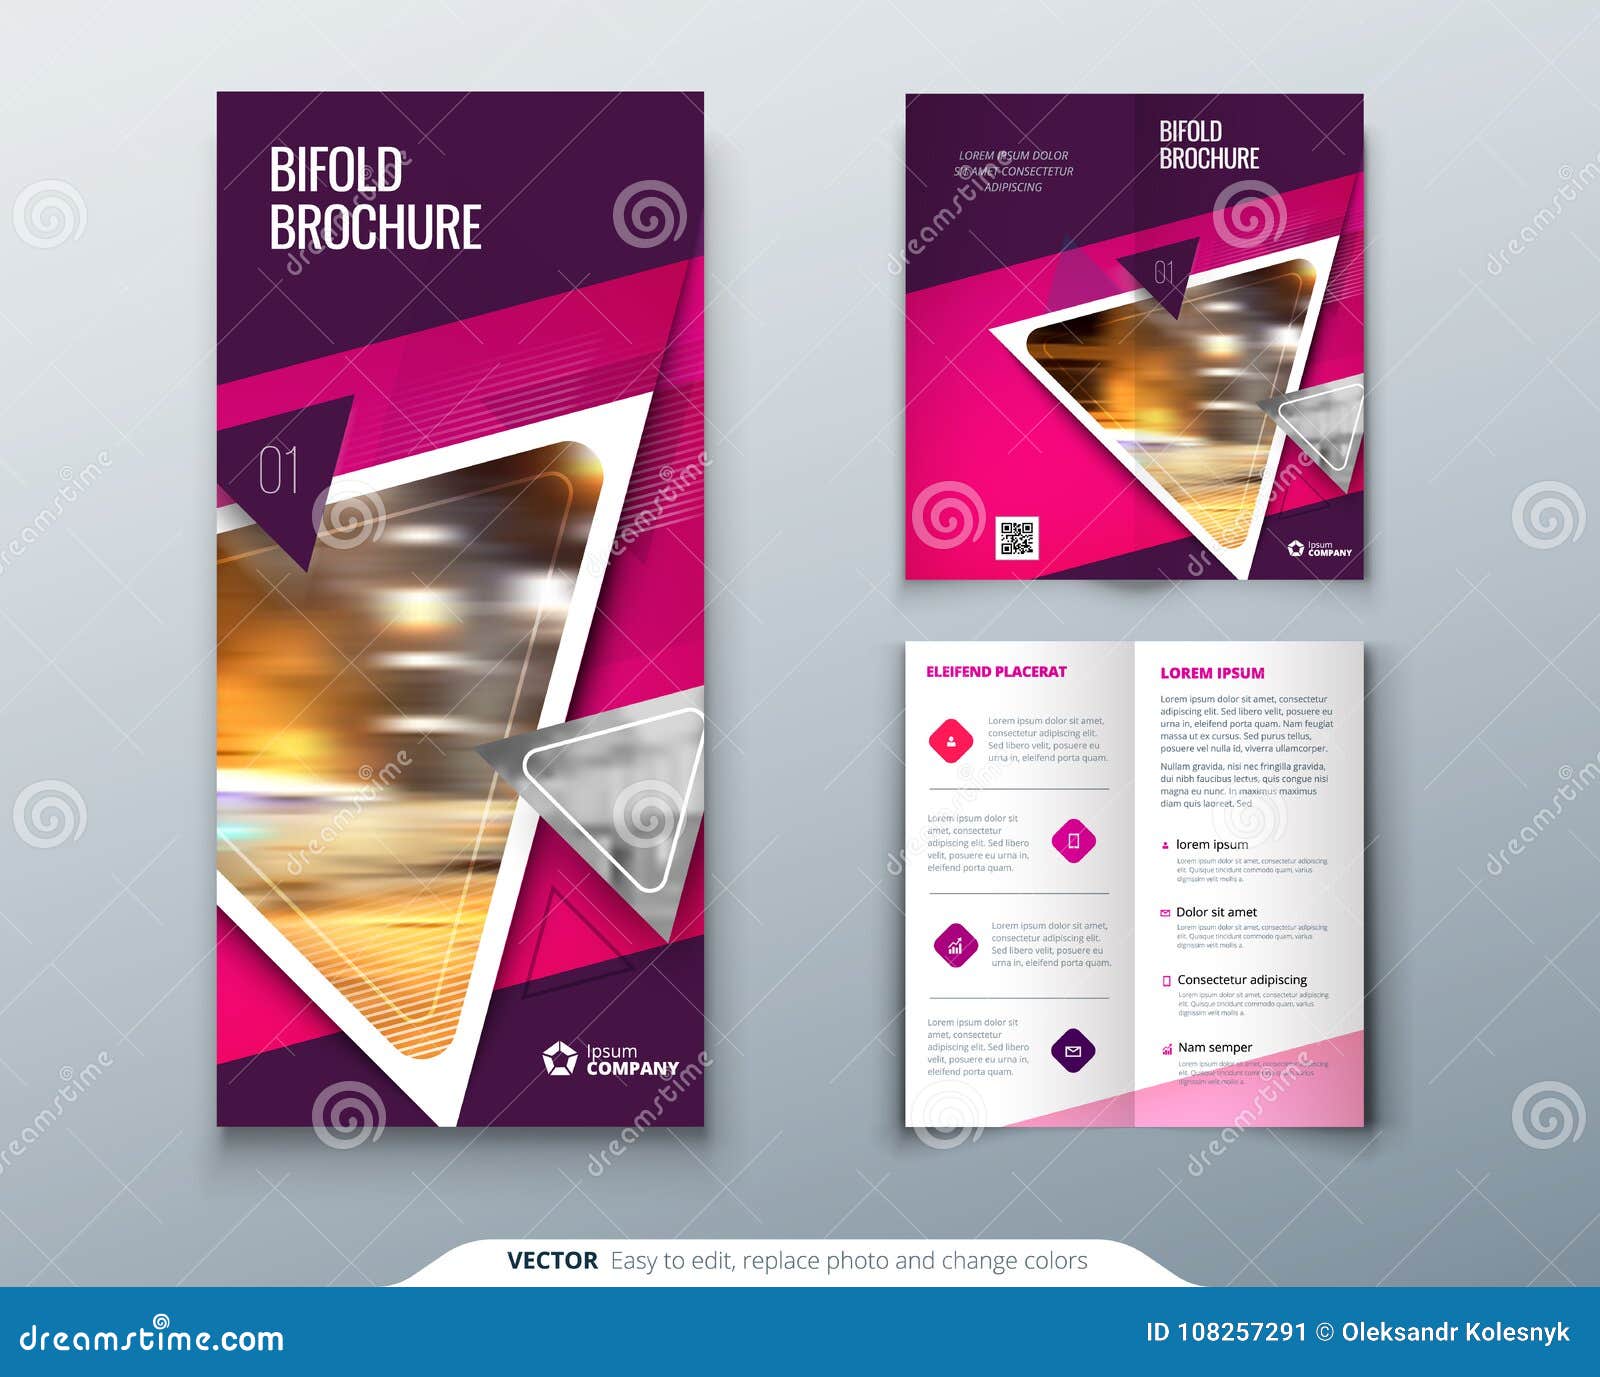 Bifold Brochure Design Pink Purple Template For Bi Fold Flyer Layout With Modern Triangle Photo And Abstract Stock Vector Illustration Of Bifold Abstract 108257291